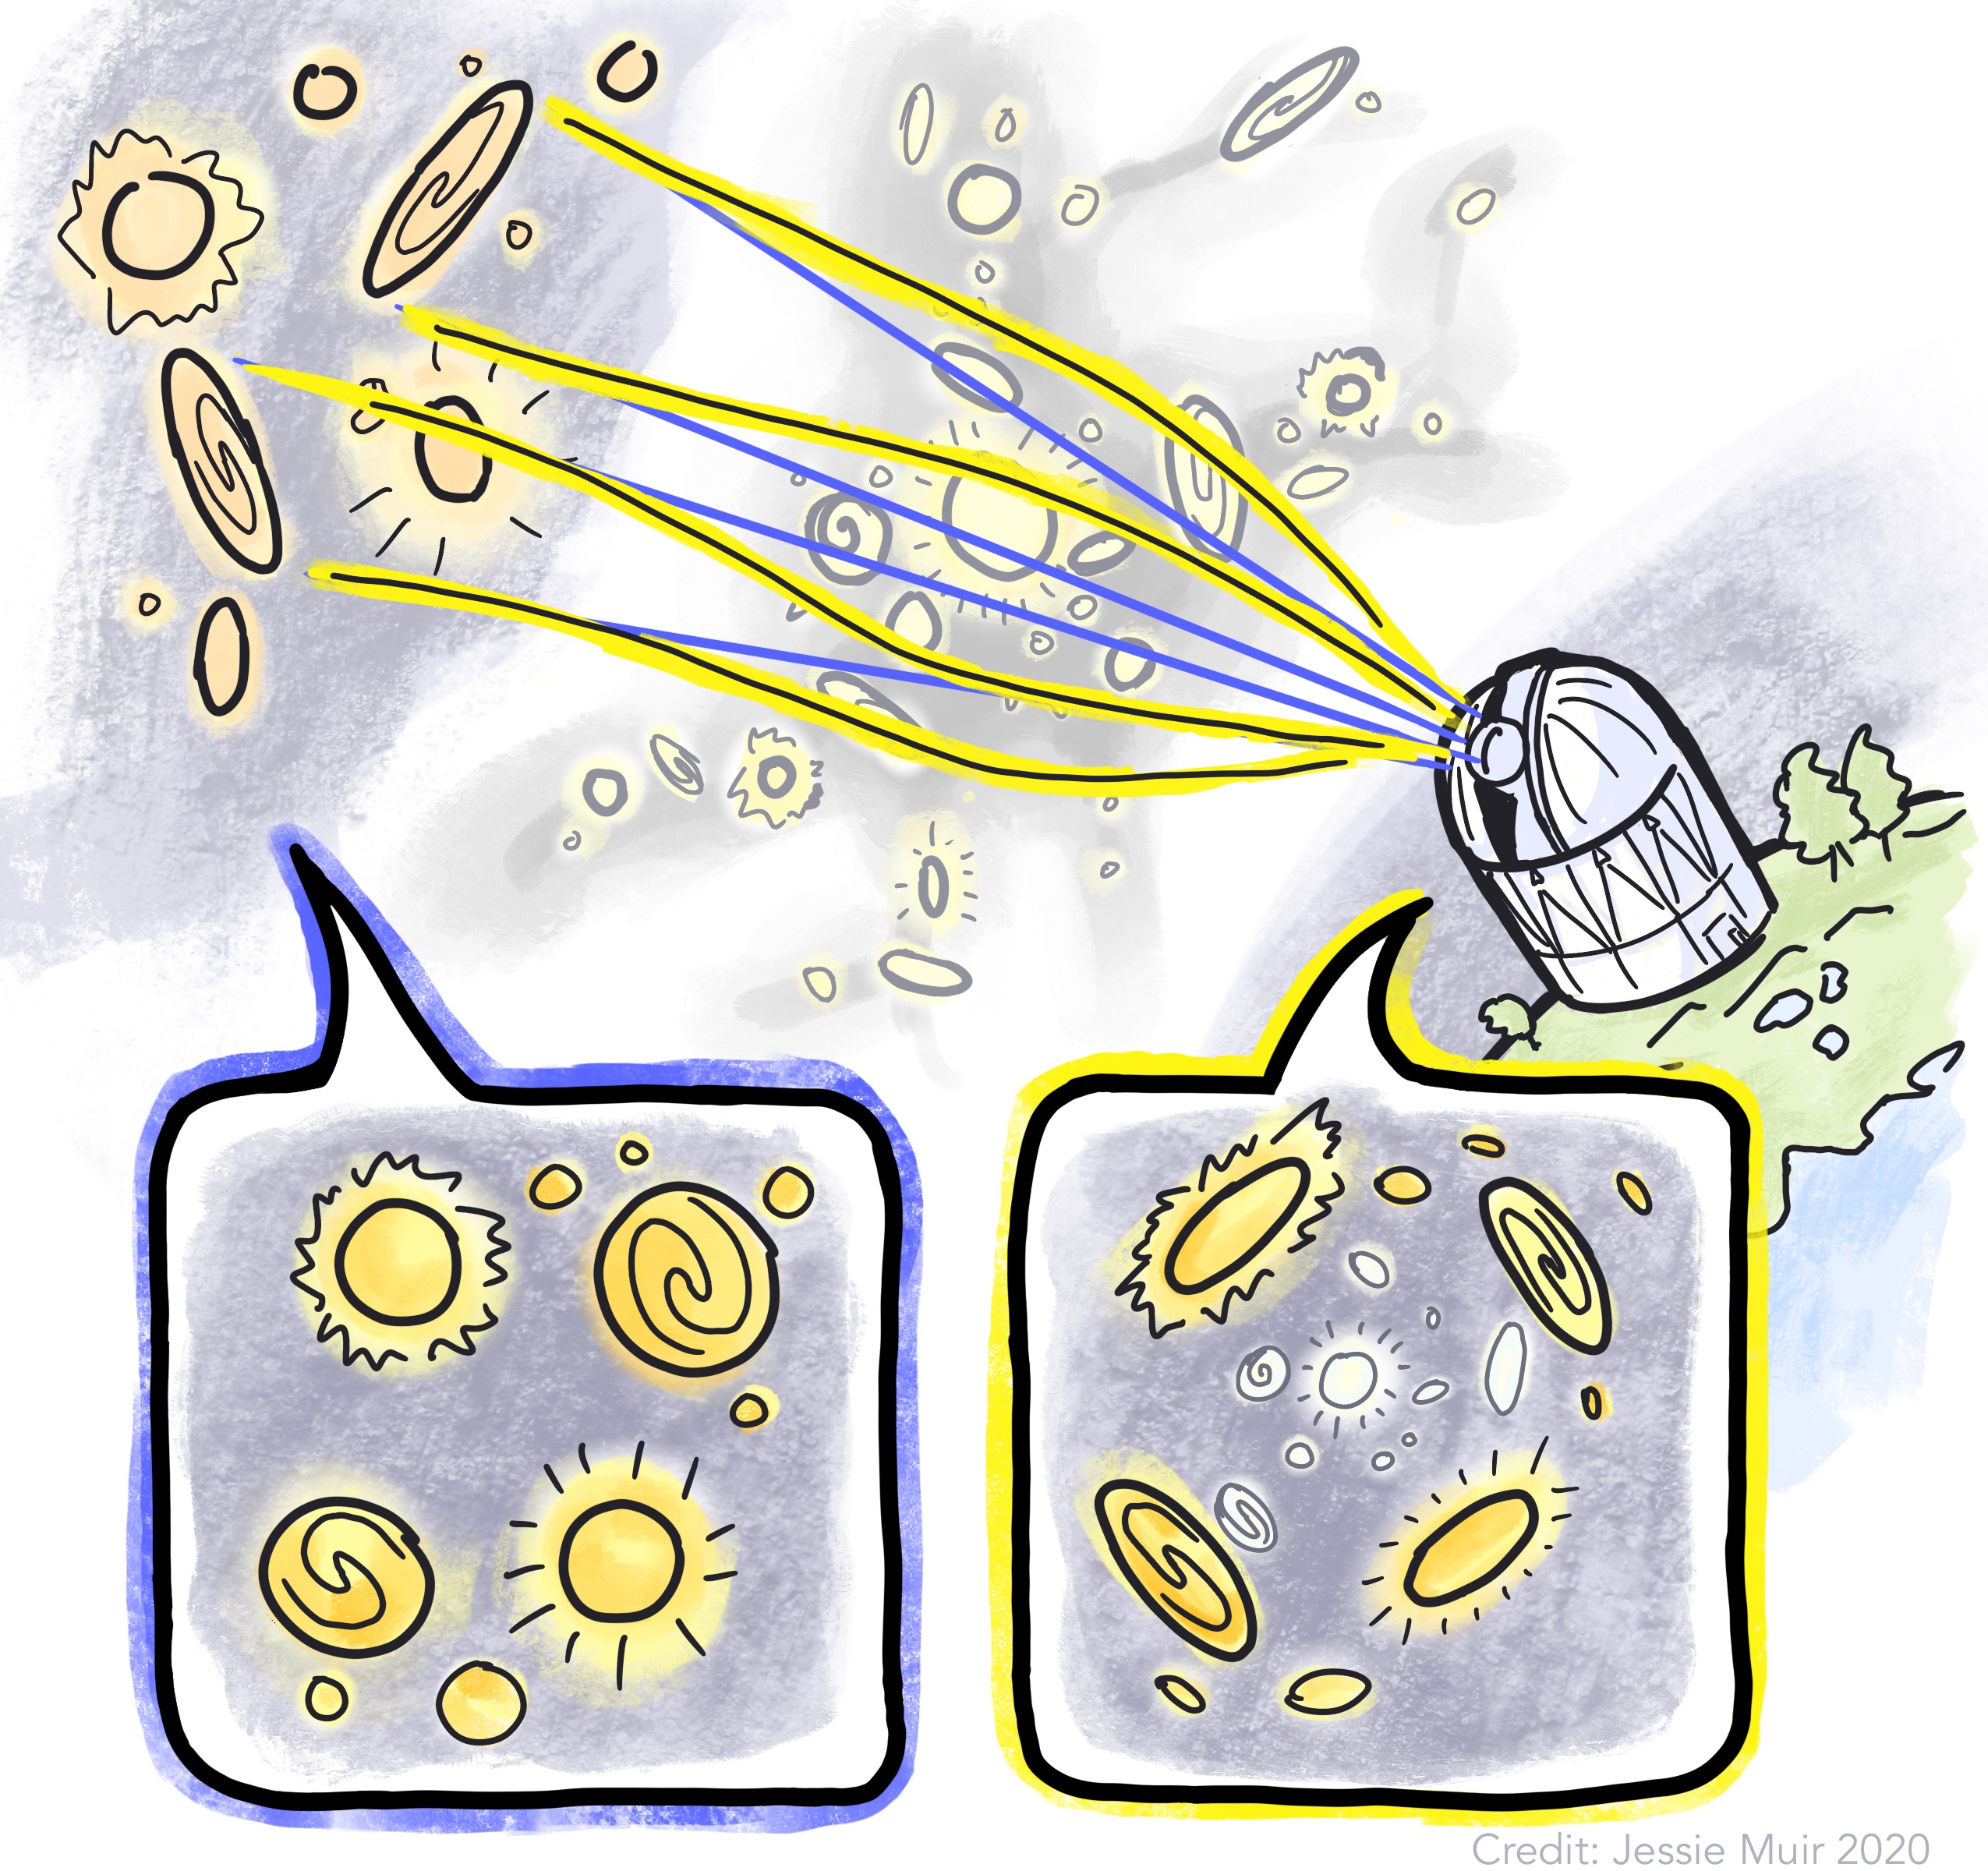 alt="Cartoon of weak gravitational lensing. Light from distant source galaxies gets deflected by large-scale structure between those galaxies and a telescope. Comic-style speech bubbles show pictures of the galaxies as they would appear for the telescope, with and without this deflection. When the light is deflected, the images of the background galaxies are distorted."